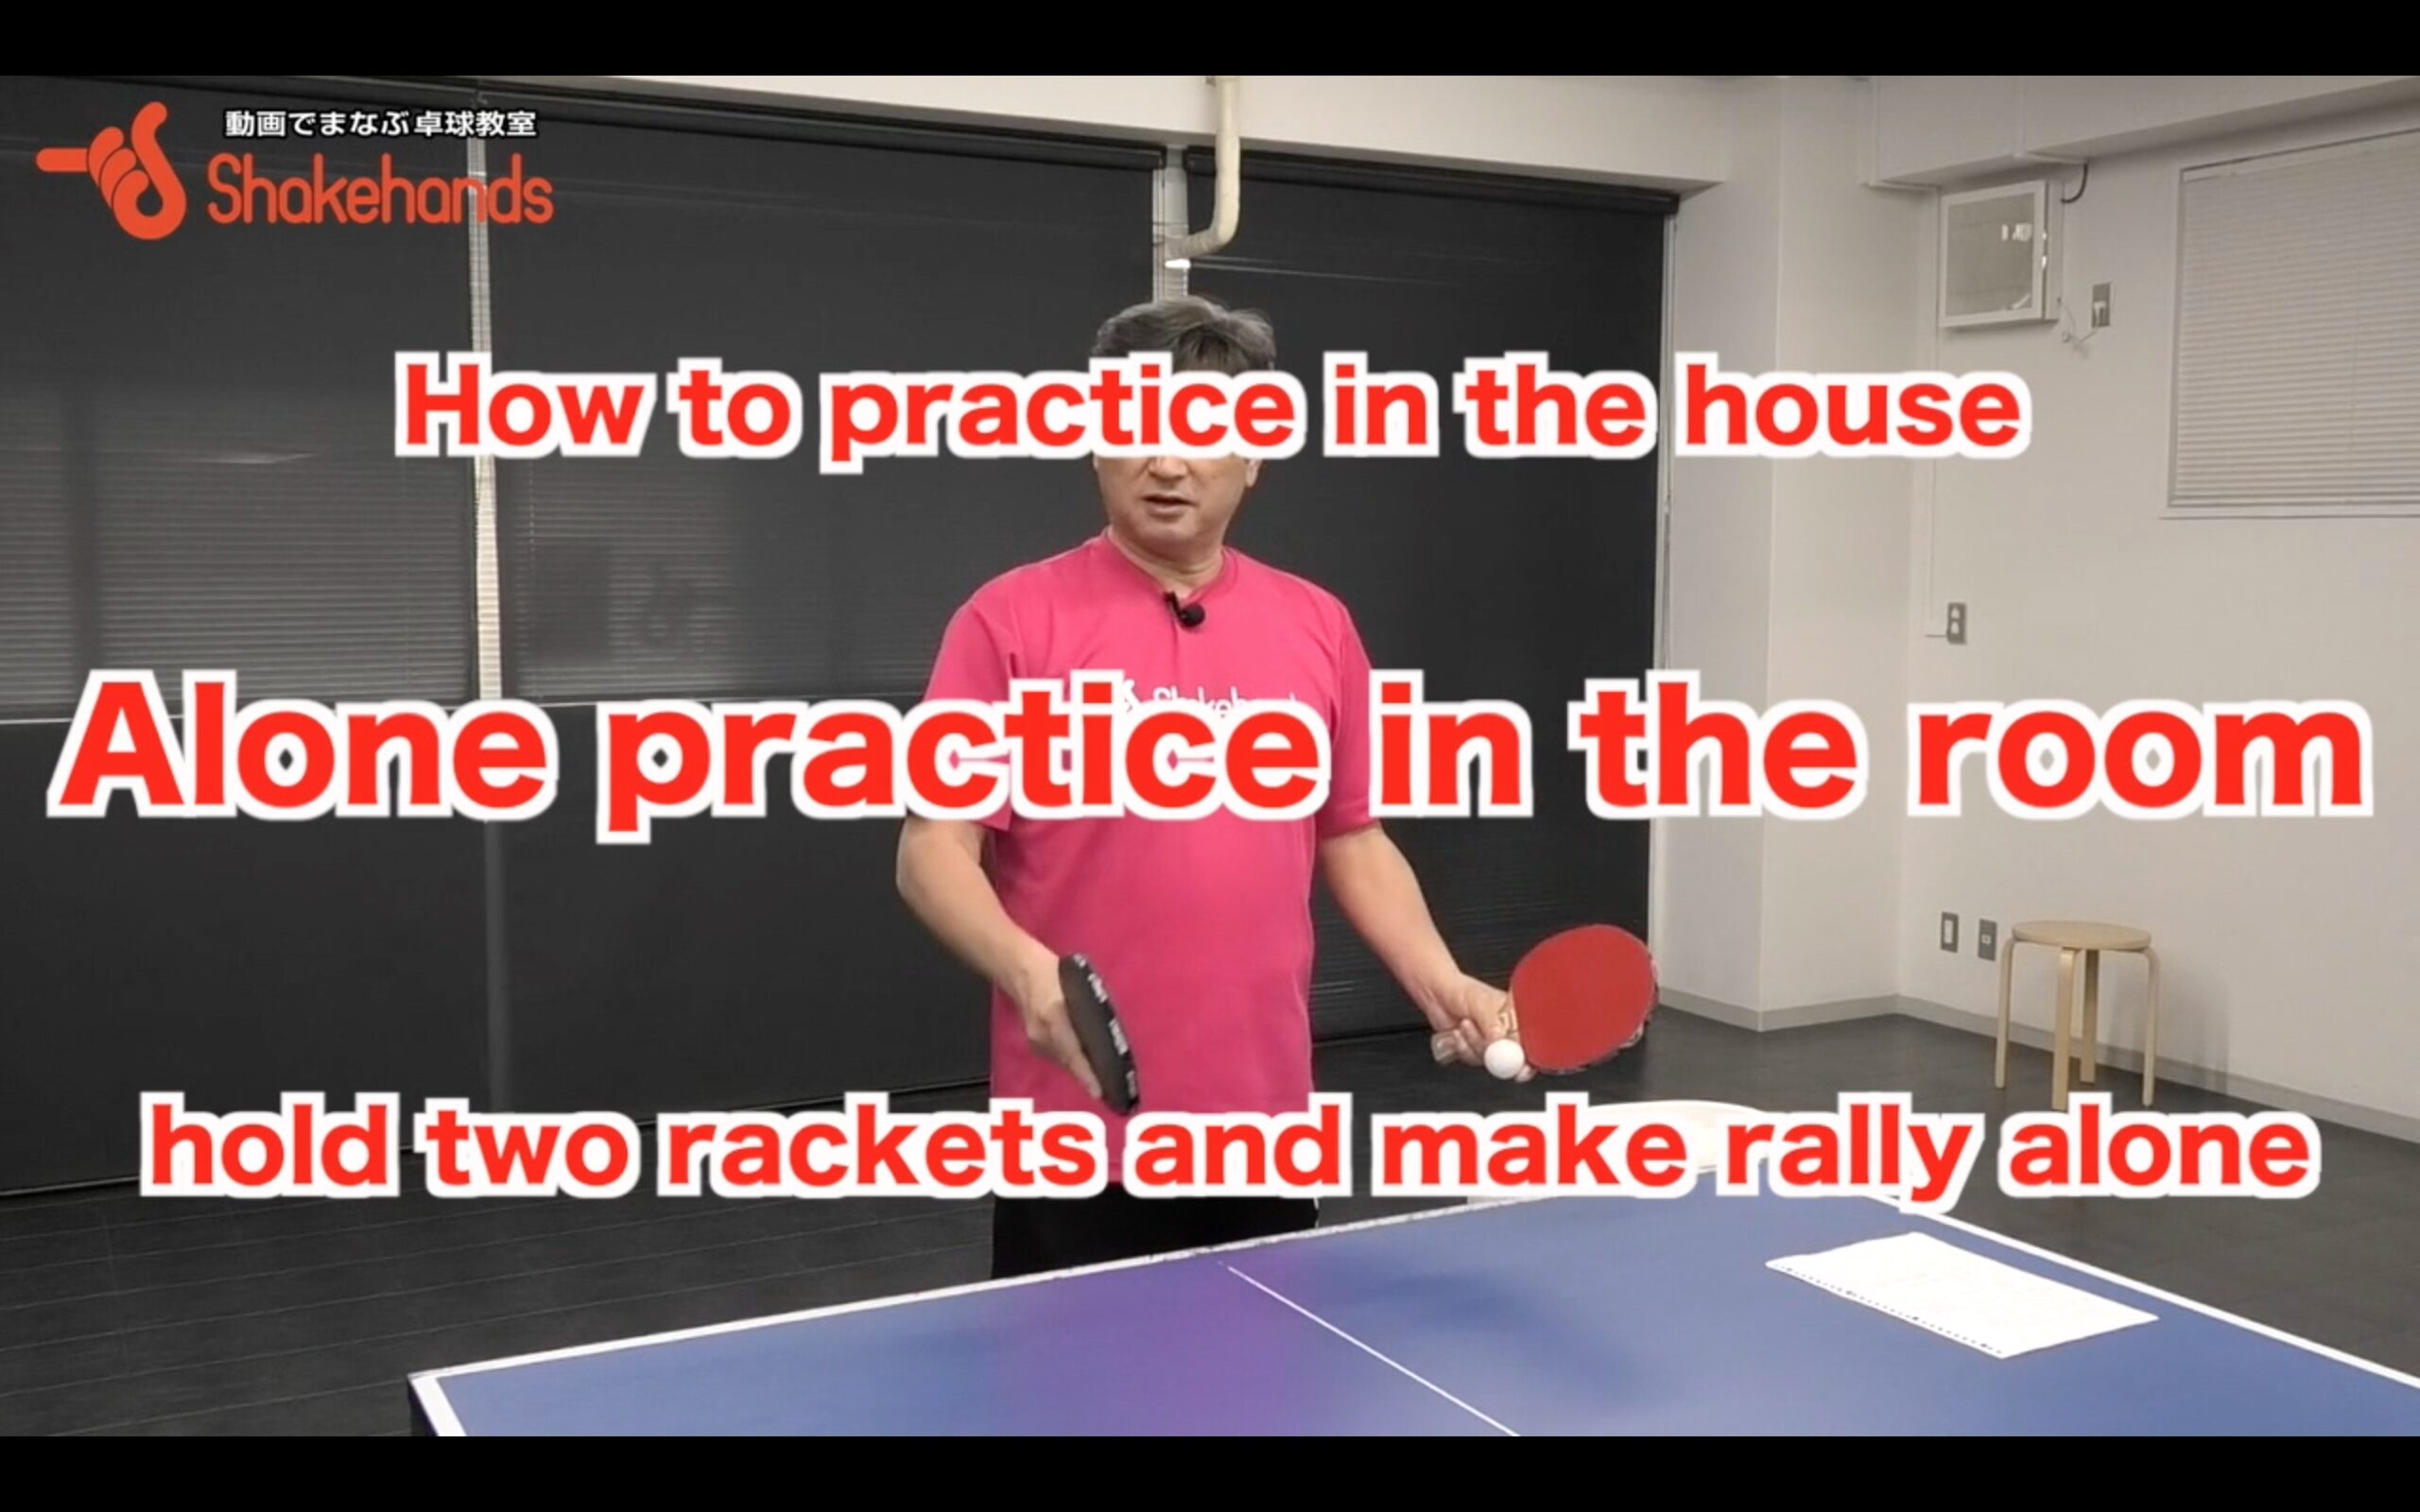 take rackets with both hands and make rally